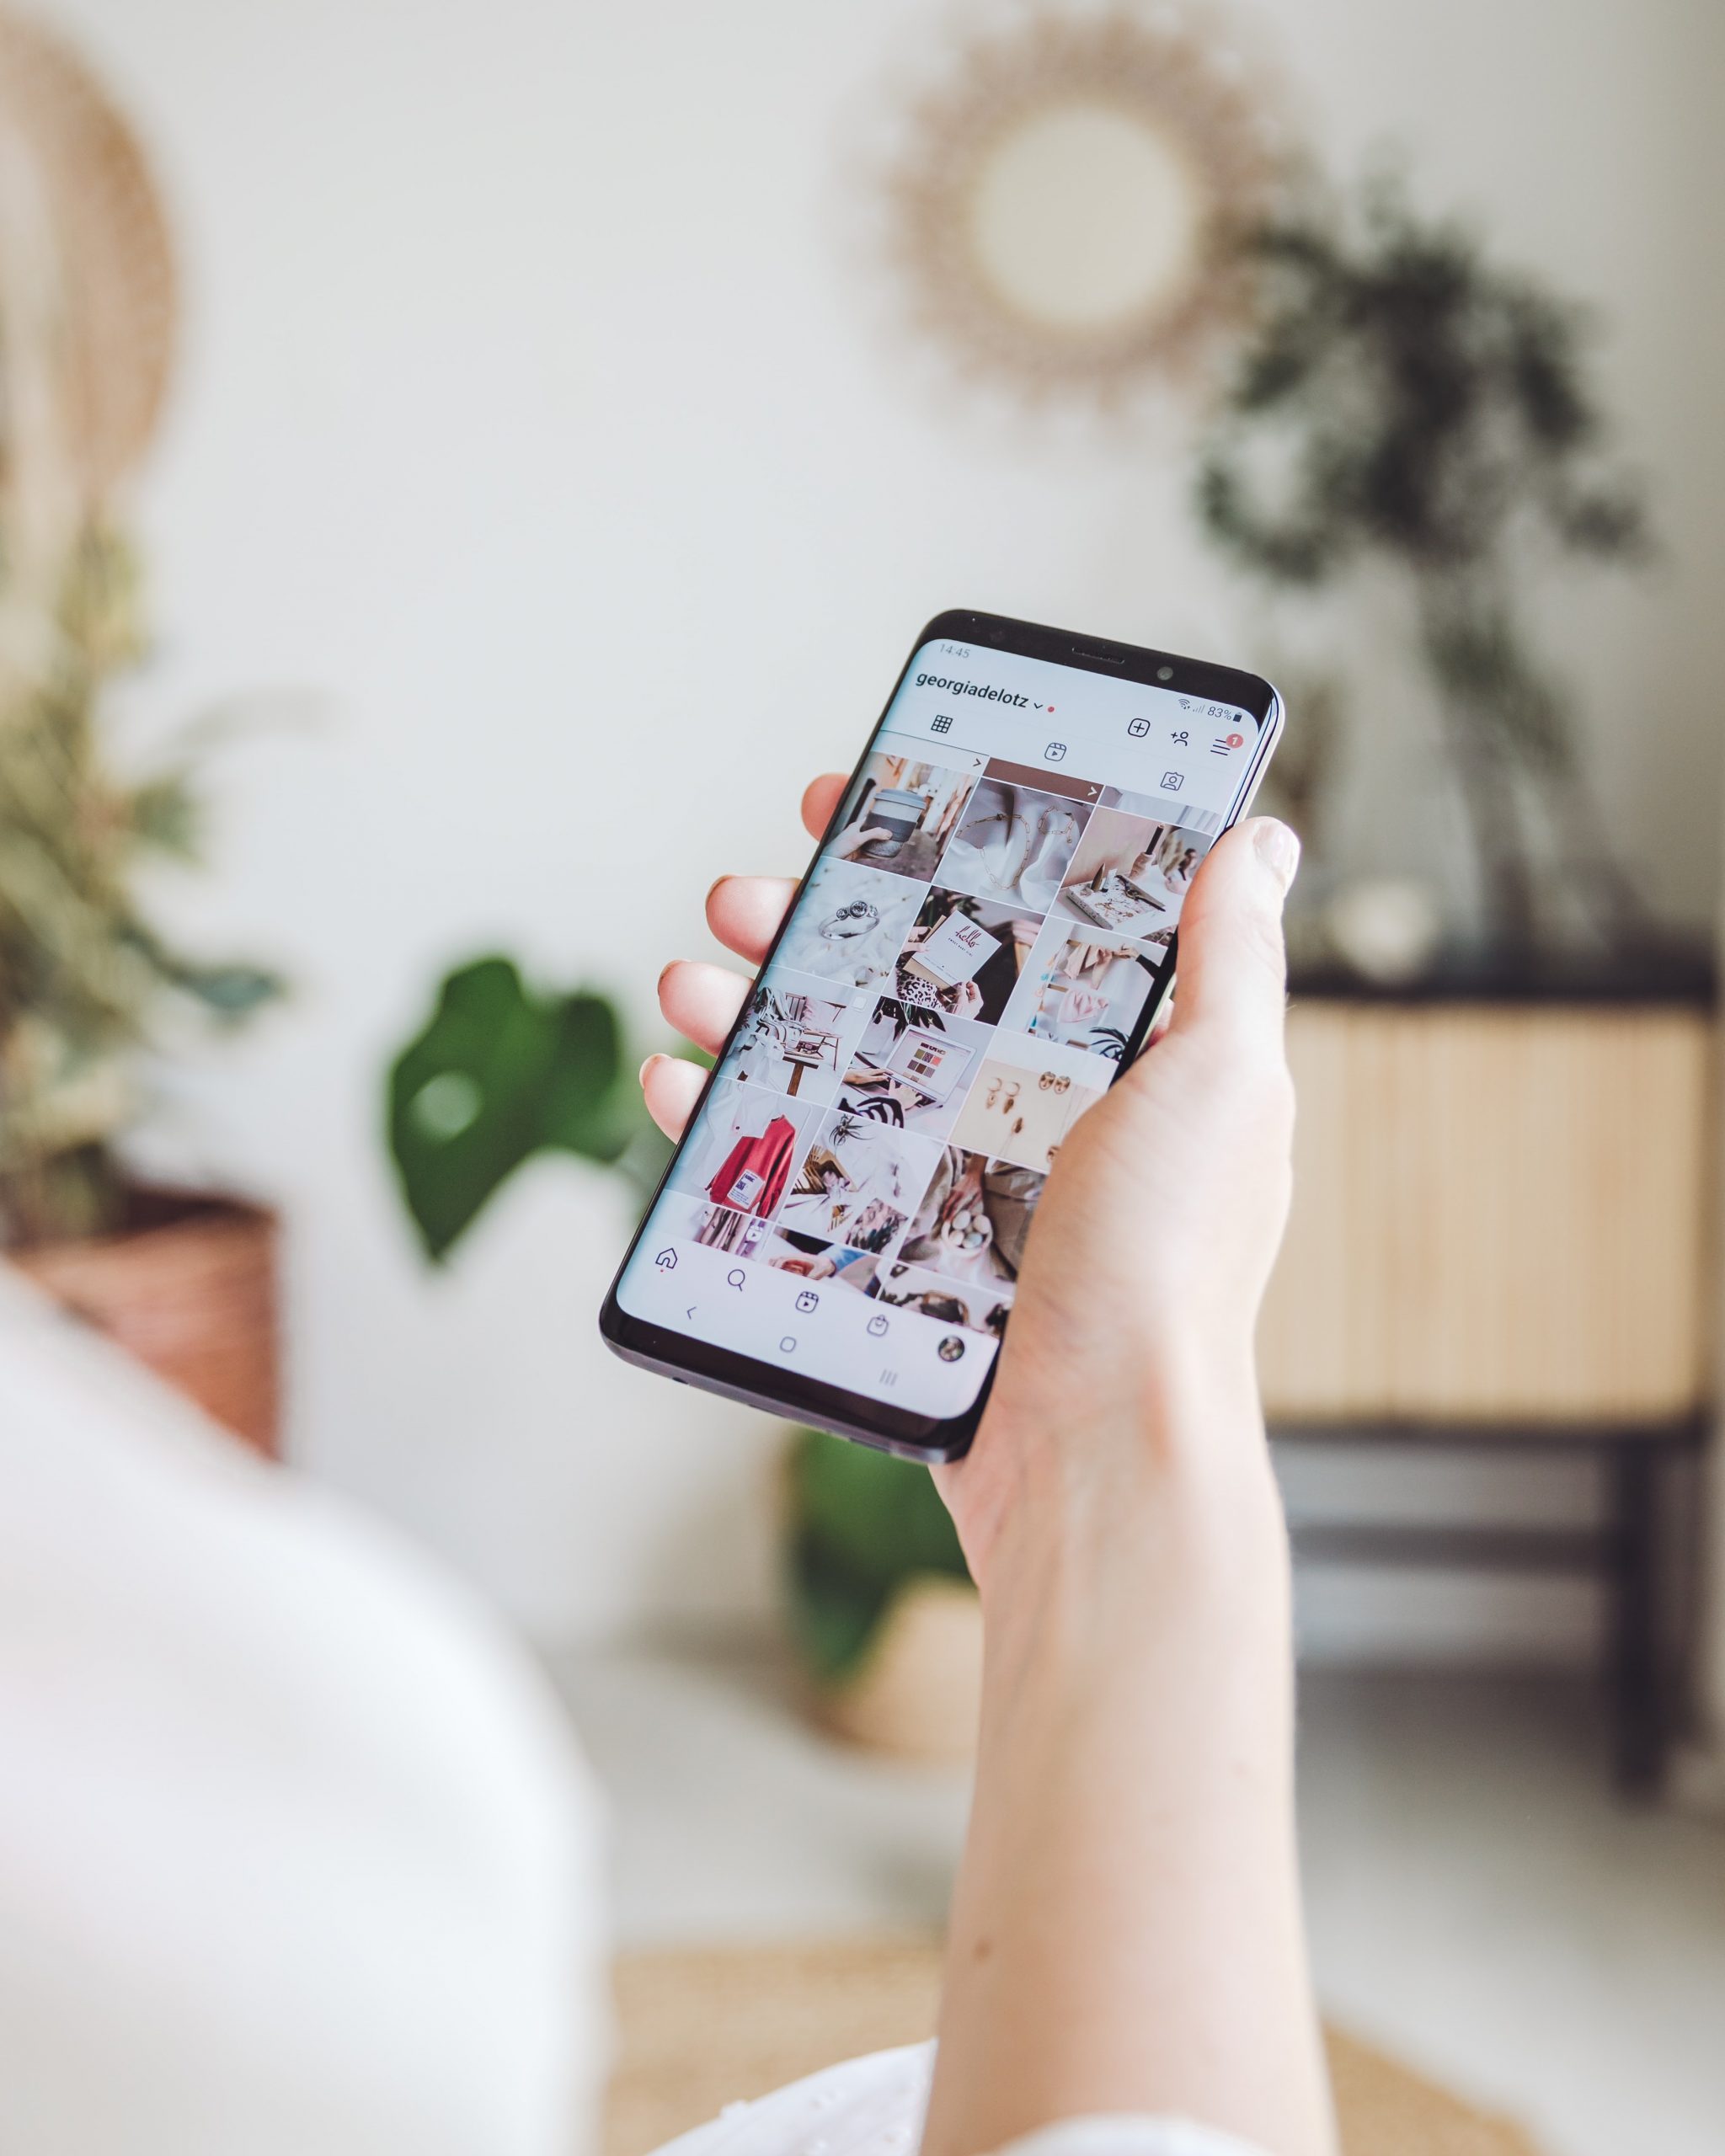 What Matters More: Instagram Stories or Posts on the Newsfeed?